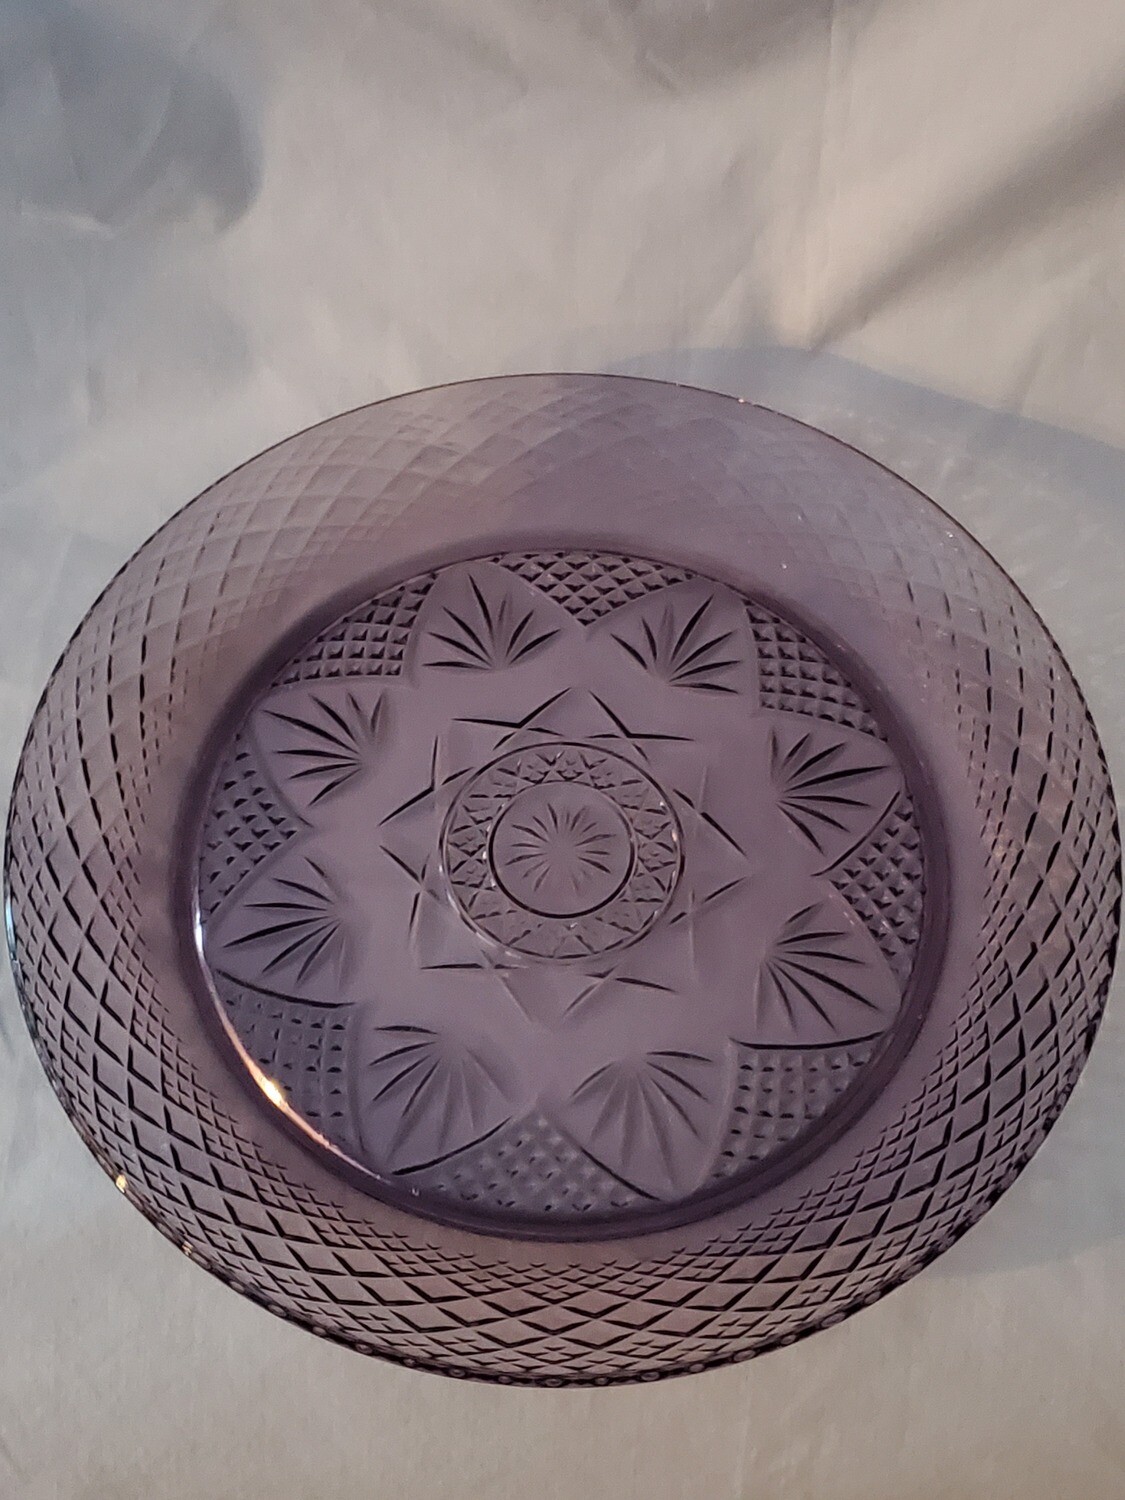 Antique Amethyst Dinner Plate 10 1/4" by Cristal D'Arques-Durand